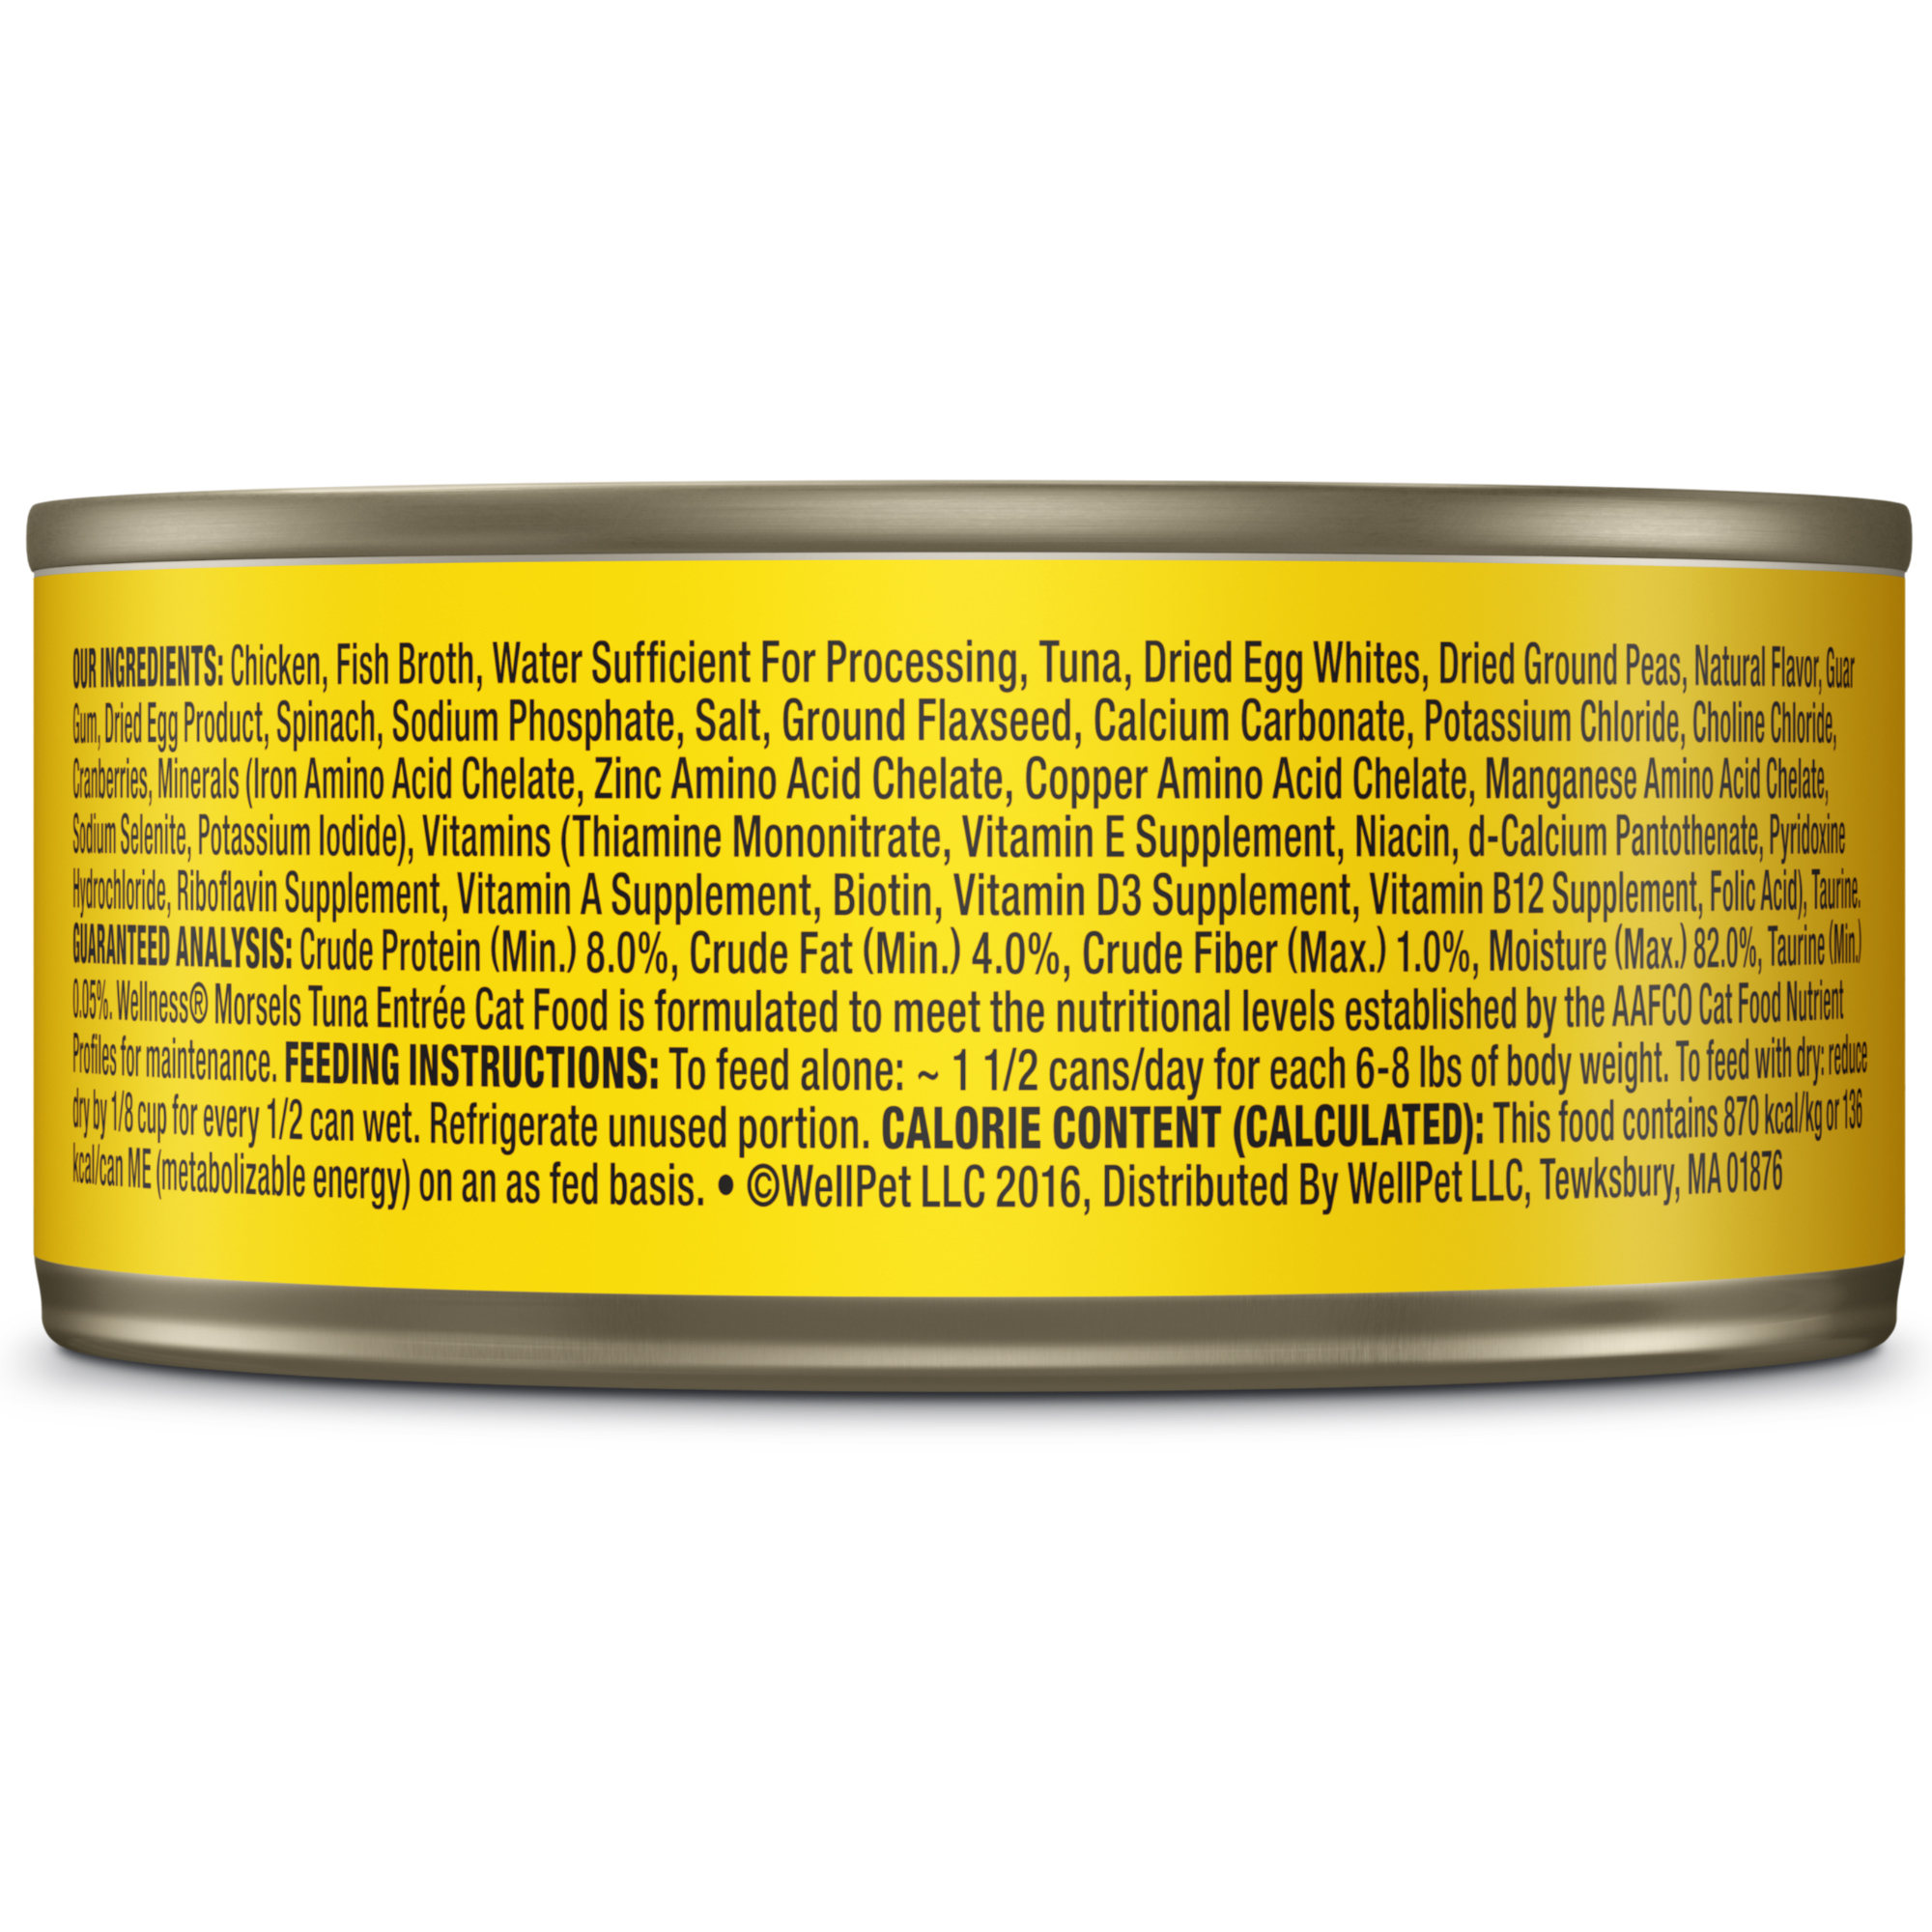 Wellness Complete Health Natural Grain Free Wet Canned Cat Food, Cubed Tuna Entree, 5.5-Ounce Can (Pack of 24) - image 3 of 8